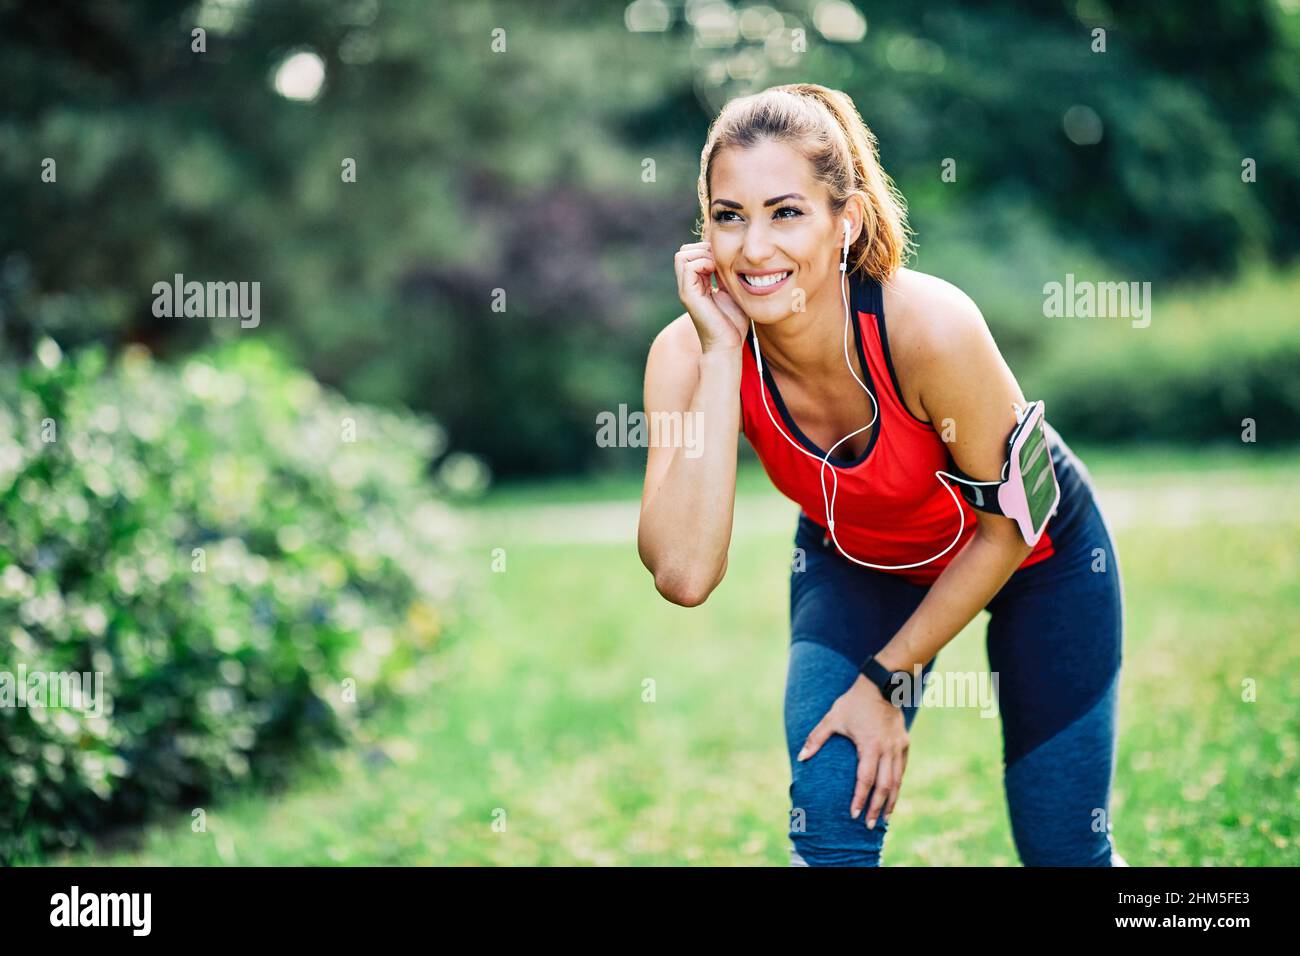 fitness woman park exercise lifestyle outdoor sport healthy female nature active young fit training athlete Stock Photo